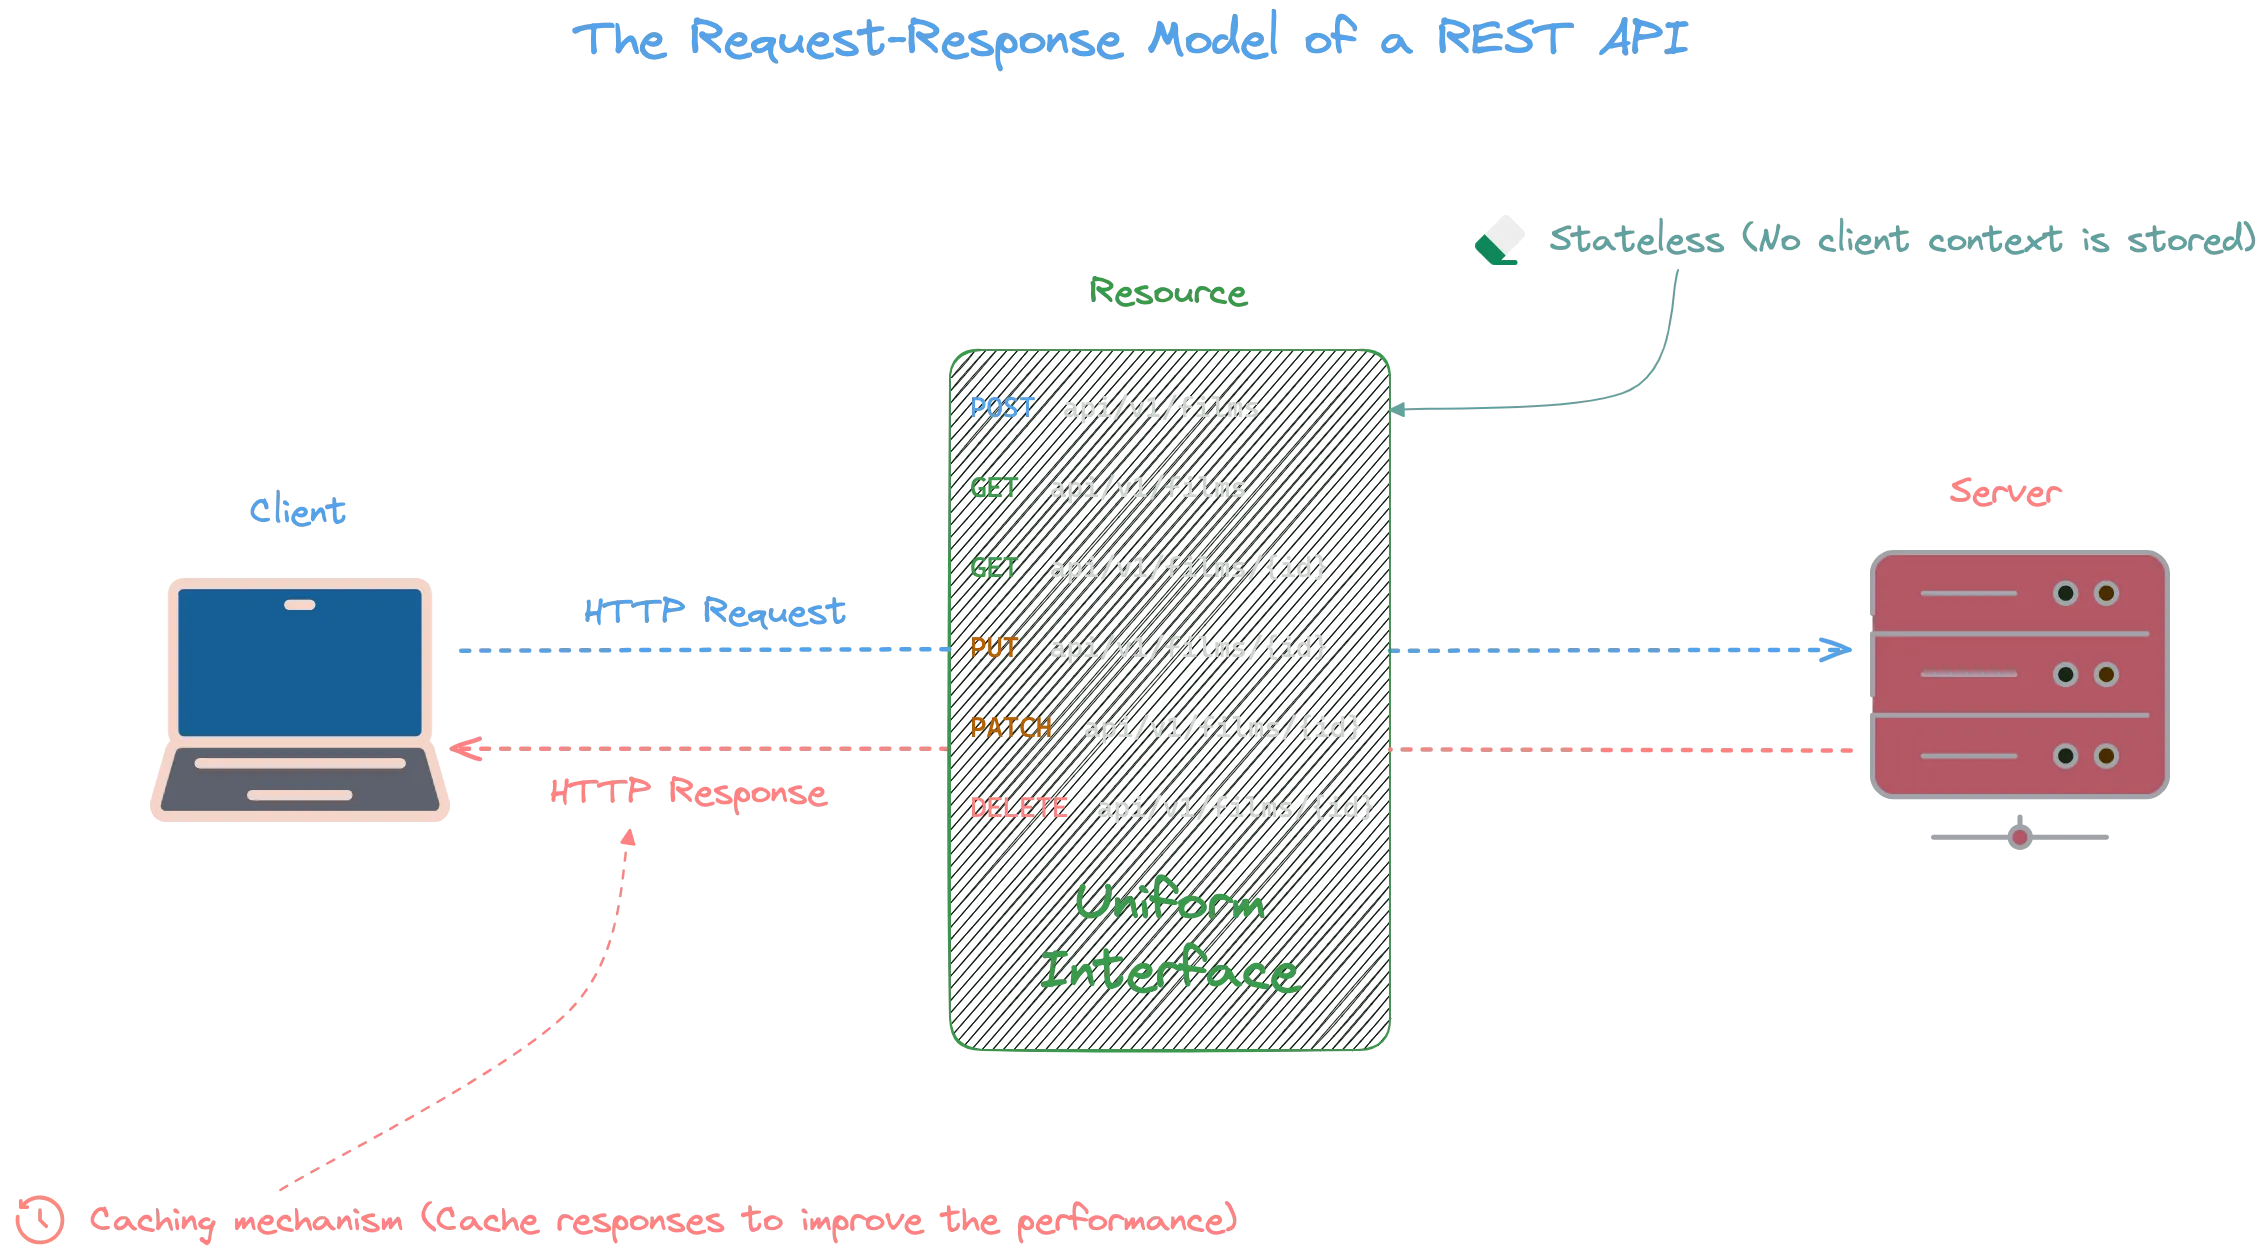 The Request-Response model of a REST API